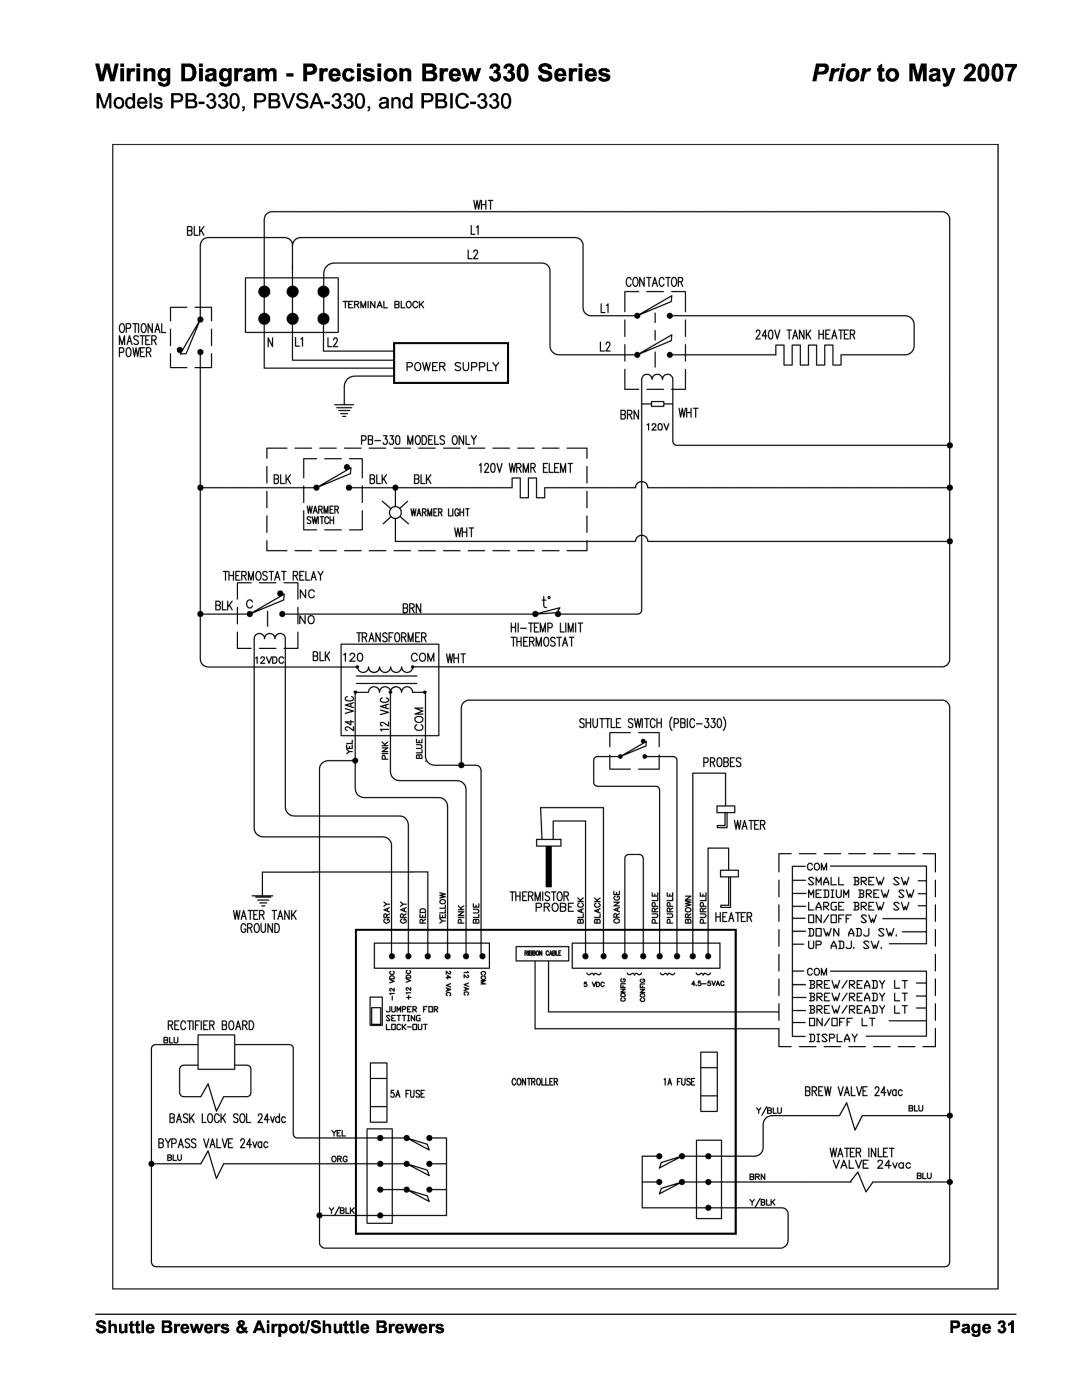 Grindmaster AM-344-04 Wiring Diagram - Precision Brew 330 Series, Prior to May, Models PB-330, PBVSA-330,and PBIC-330 